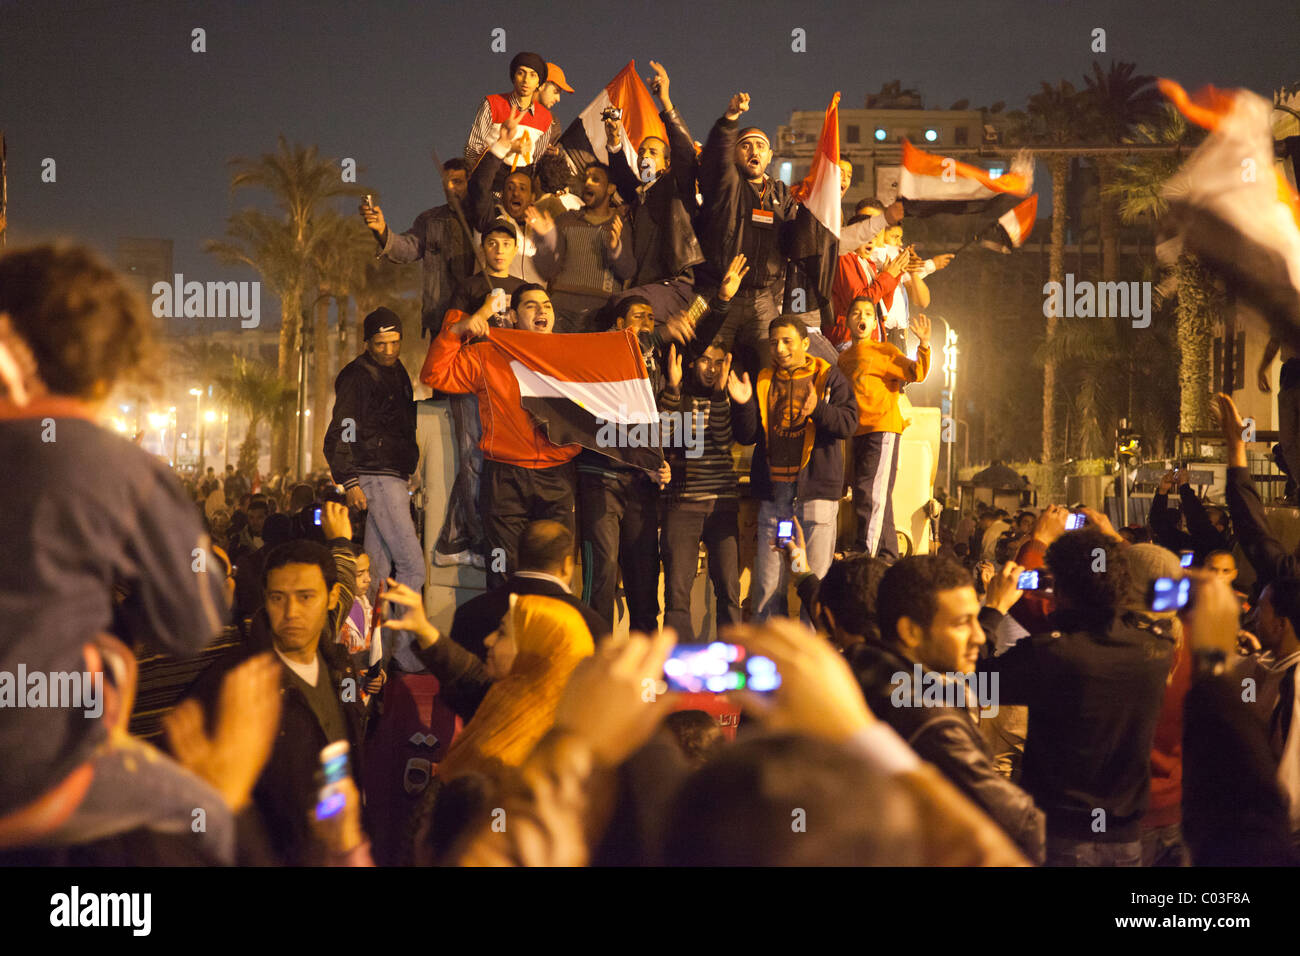 Egyptian demonstrators celebrating victory in the revolution at Tahrir on top of Army truck. Stock Photo